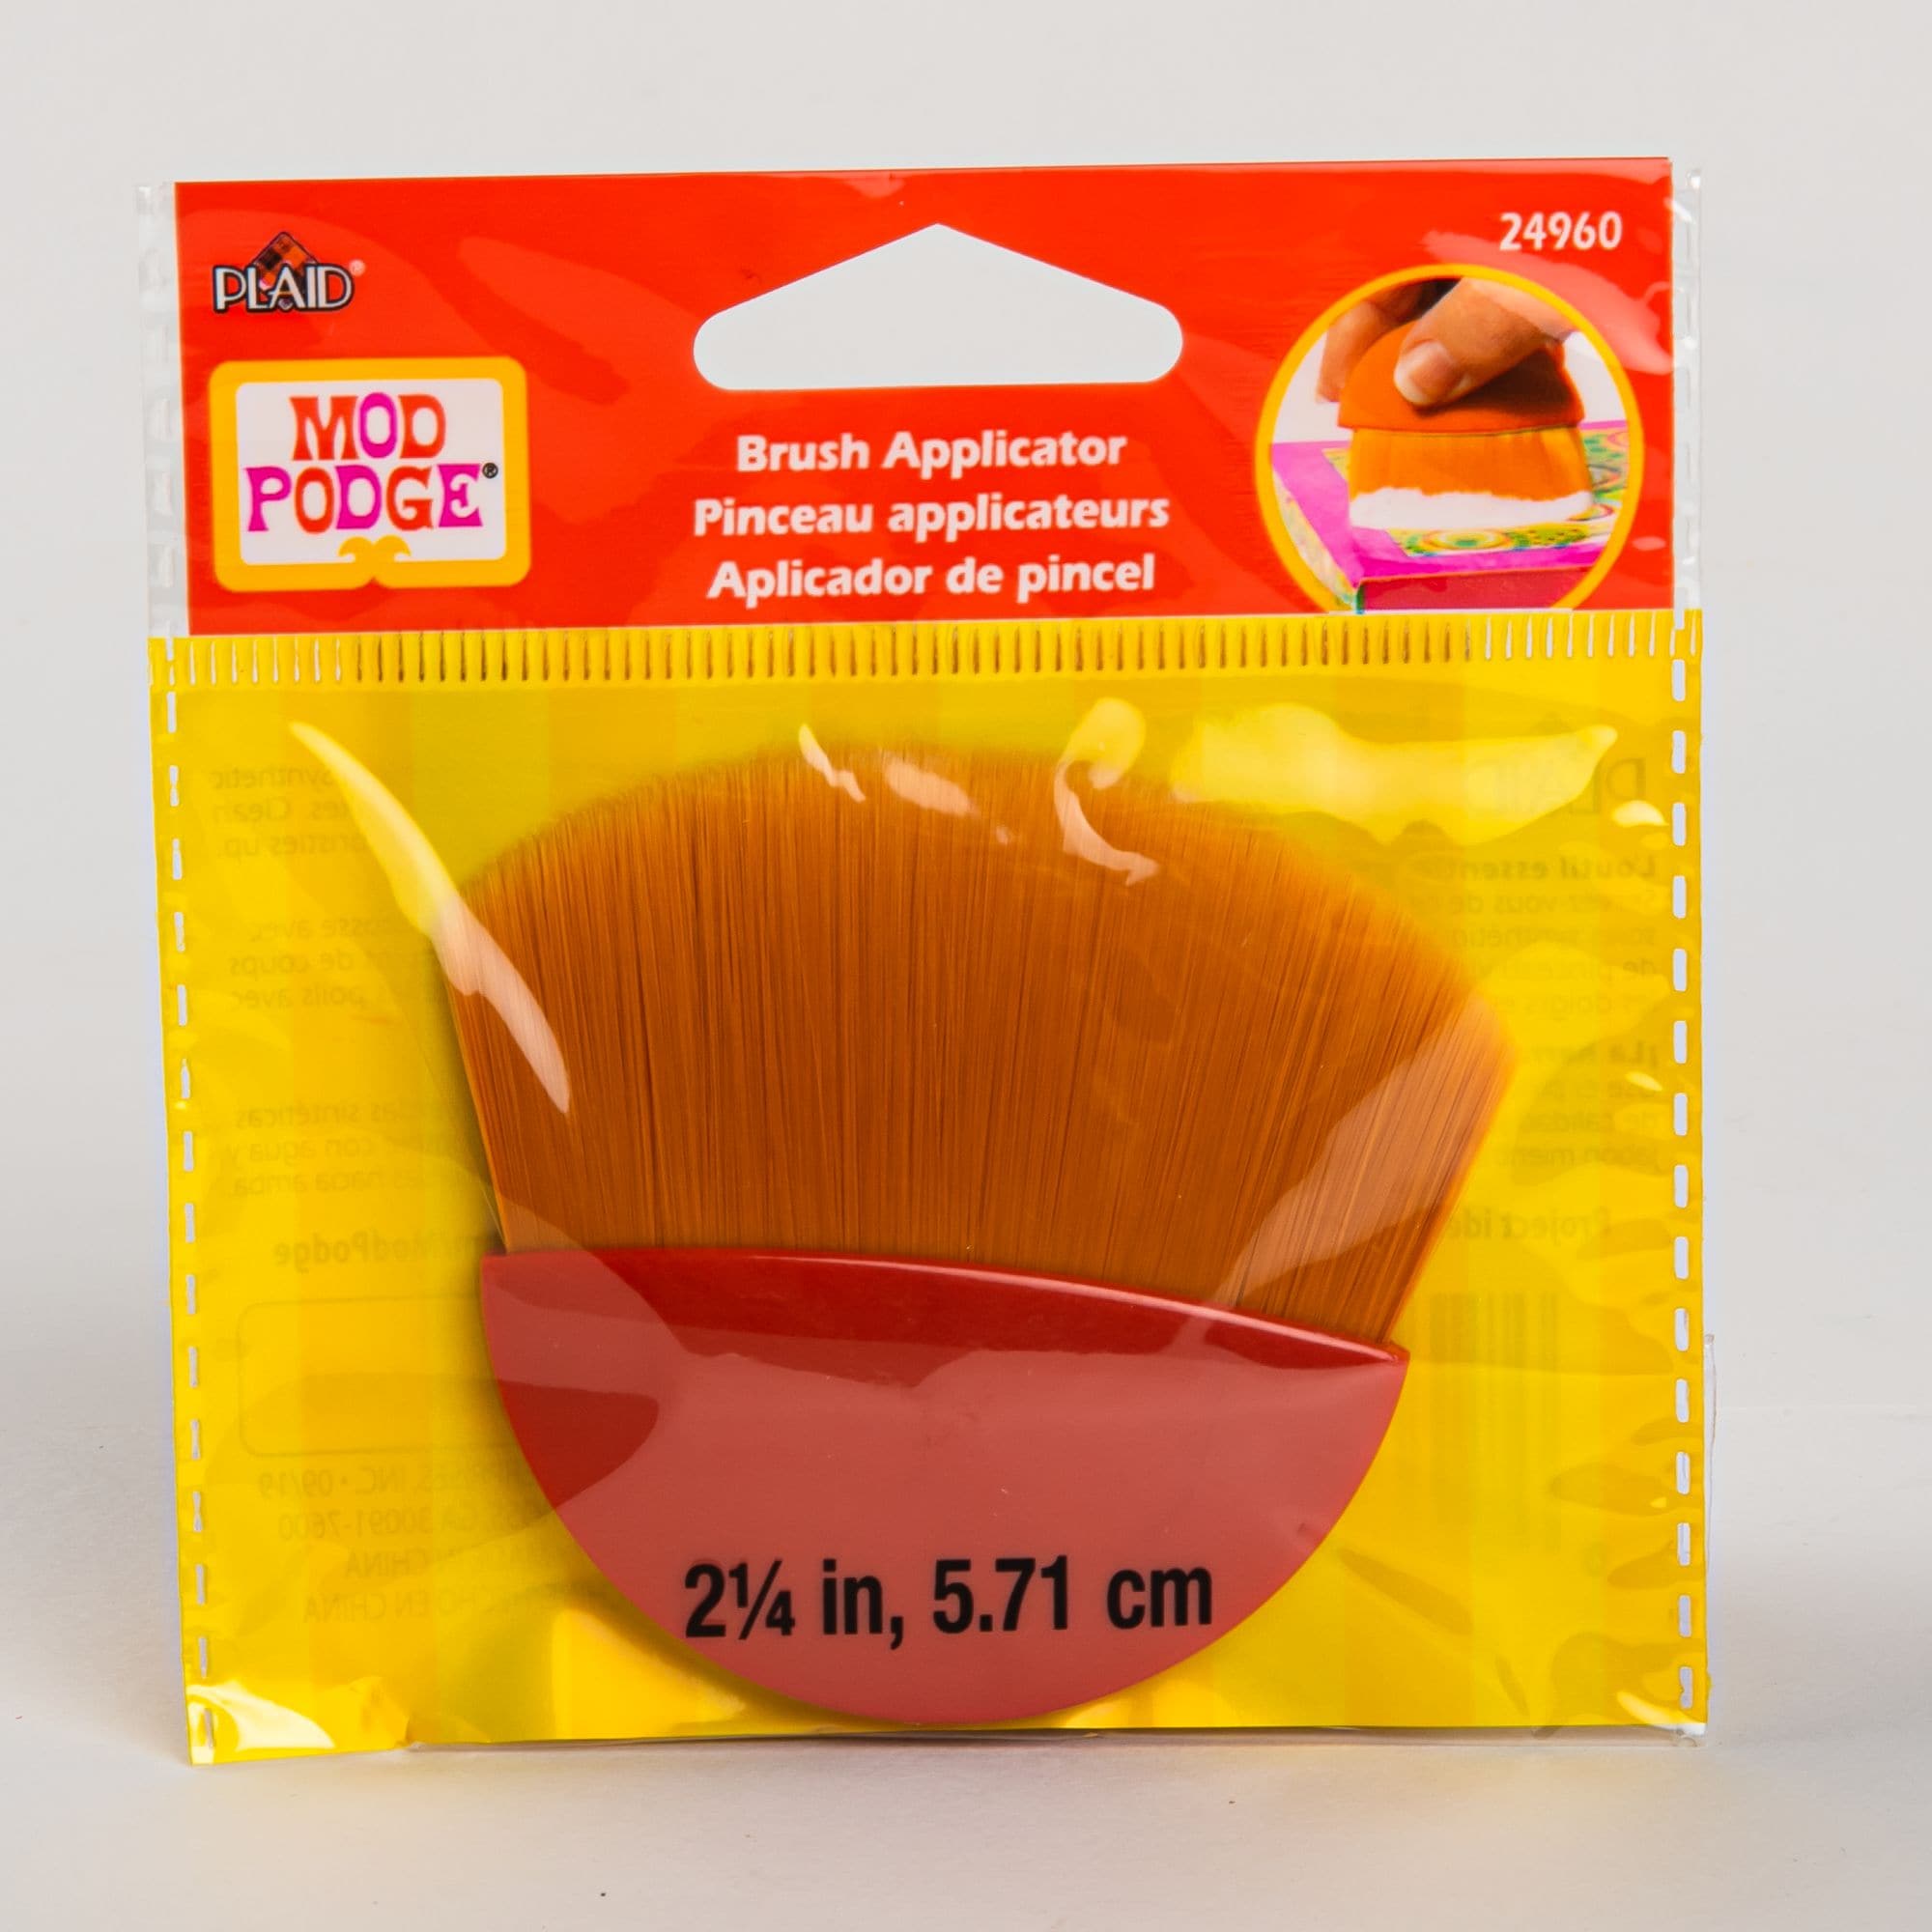 Mod Podge Brush Applicator 5.7cm 956 is where you can shop for the largest  range of online products